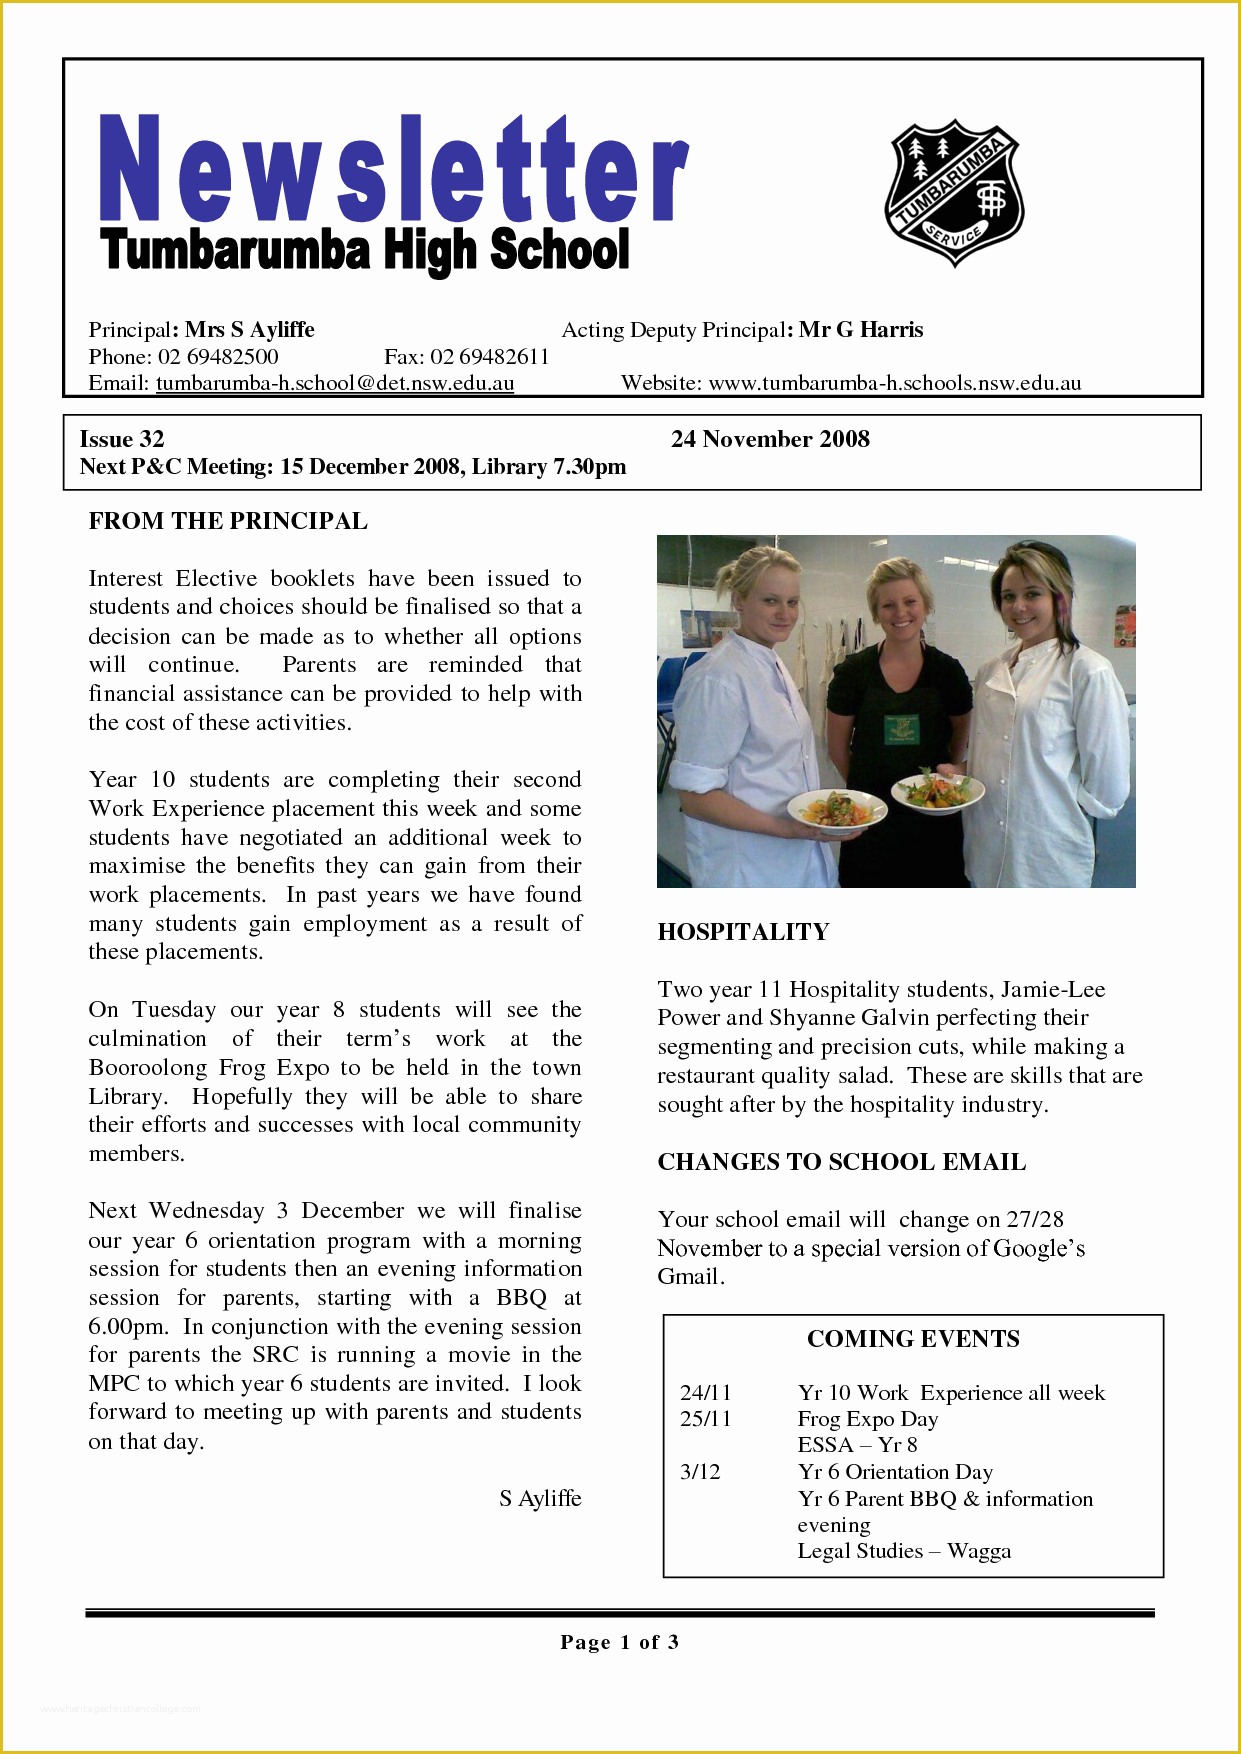 Free School Newsletter Templates Of 17 Awesome High School Newsletter Templates Images